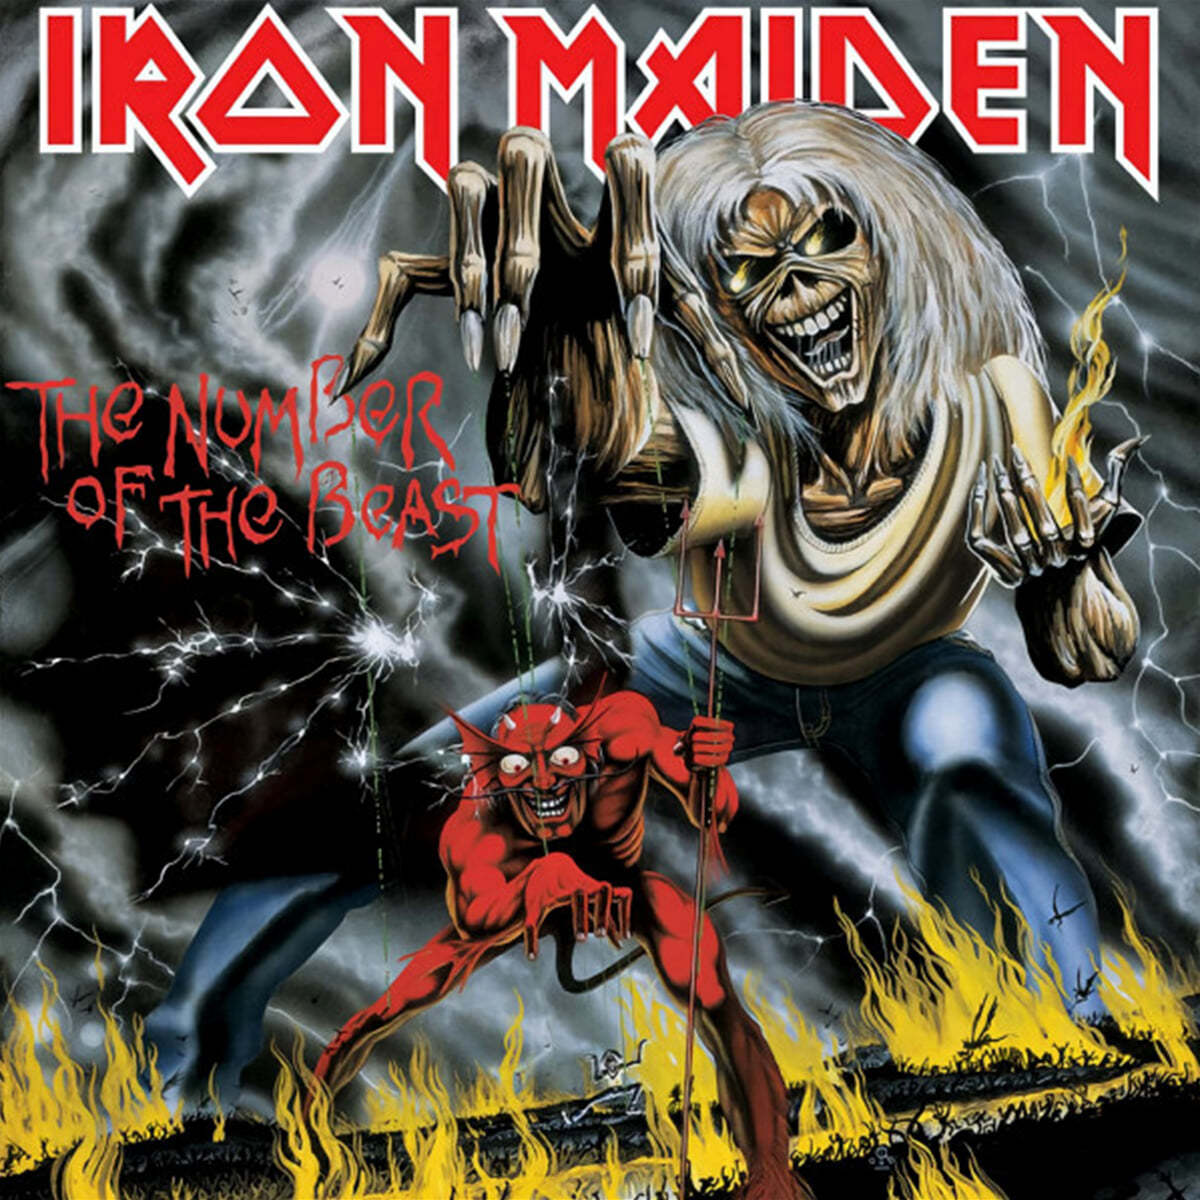 Iron Maiden (아이언 메이든) - The Number Of The Beast Plus Beast Over Hammersmith [3LP]